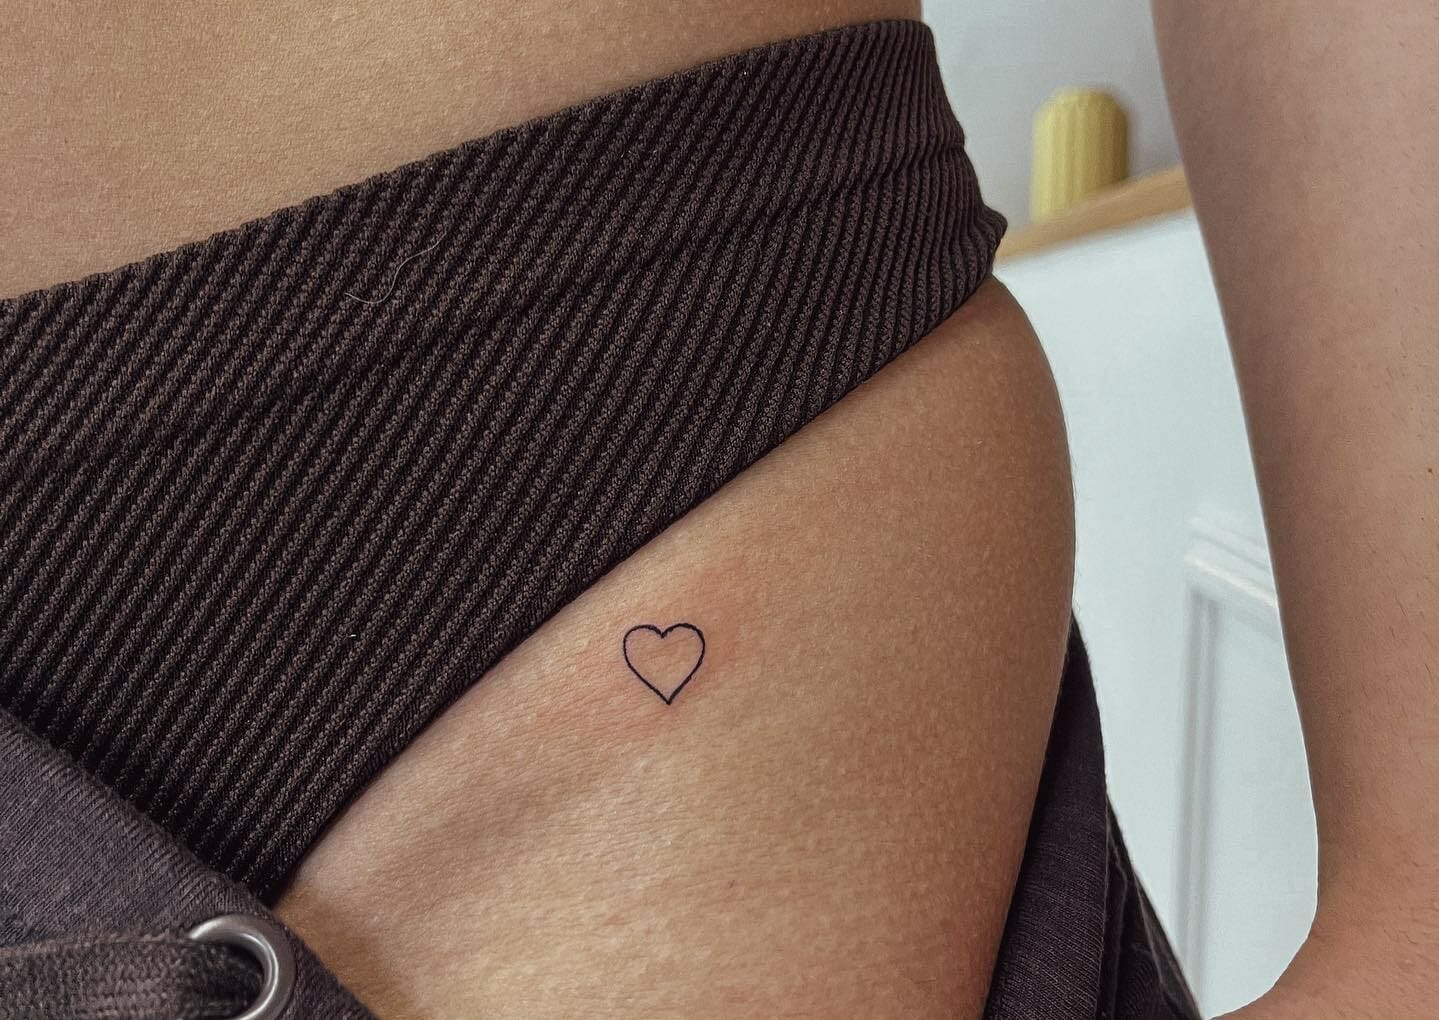 35 Above-the-Vag Tattoos